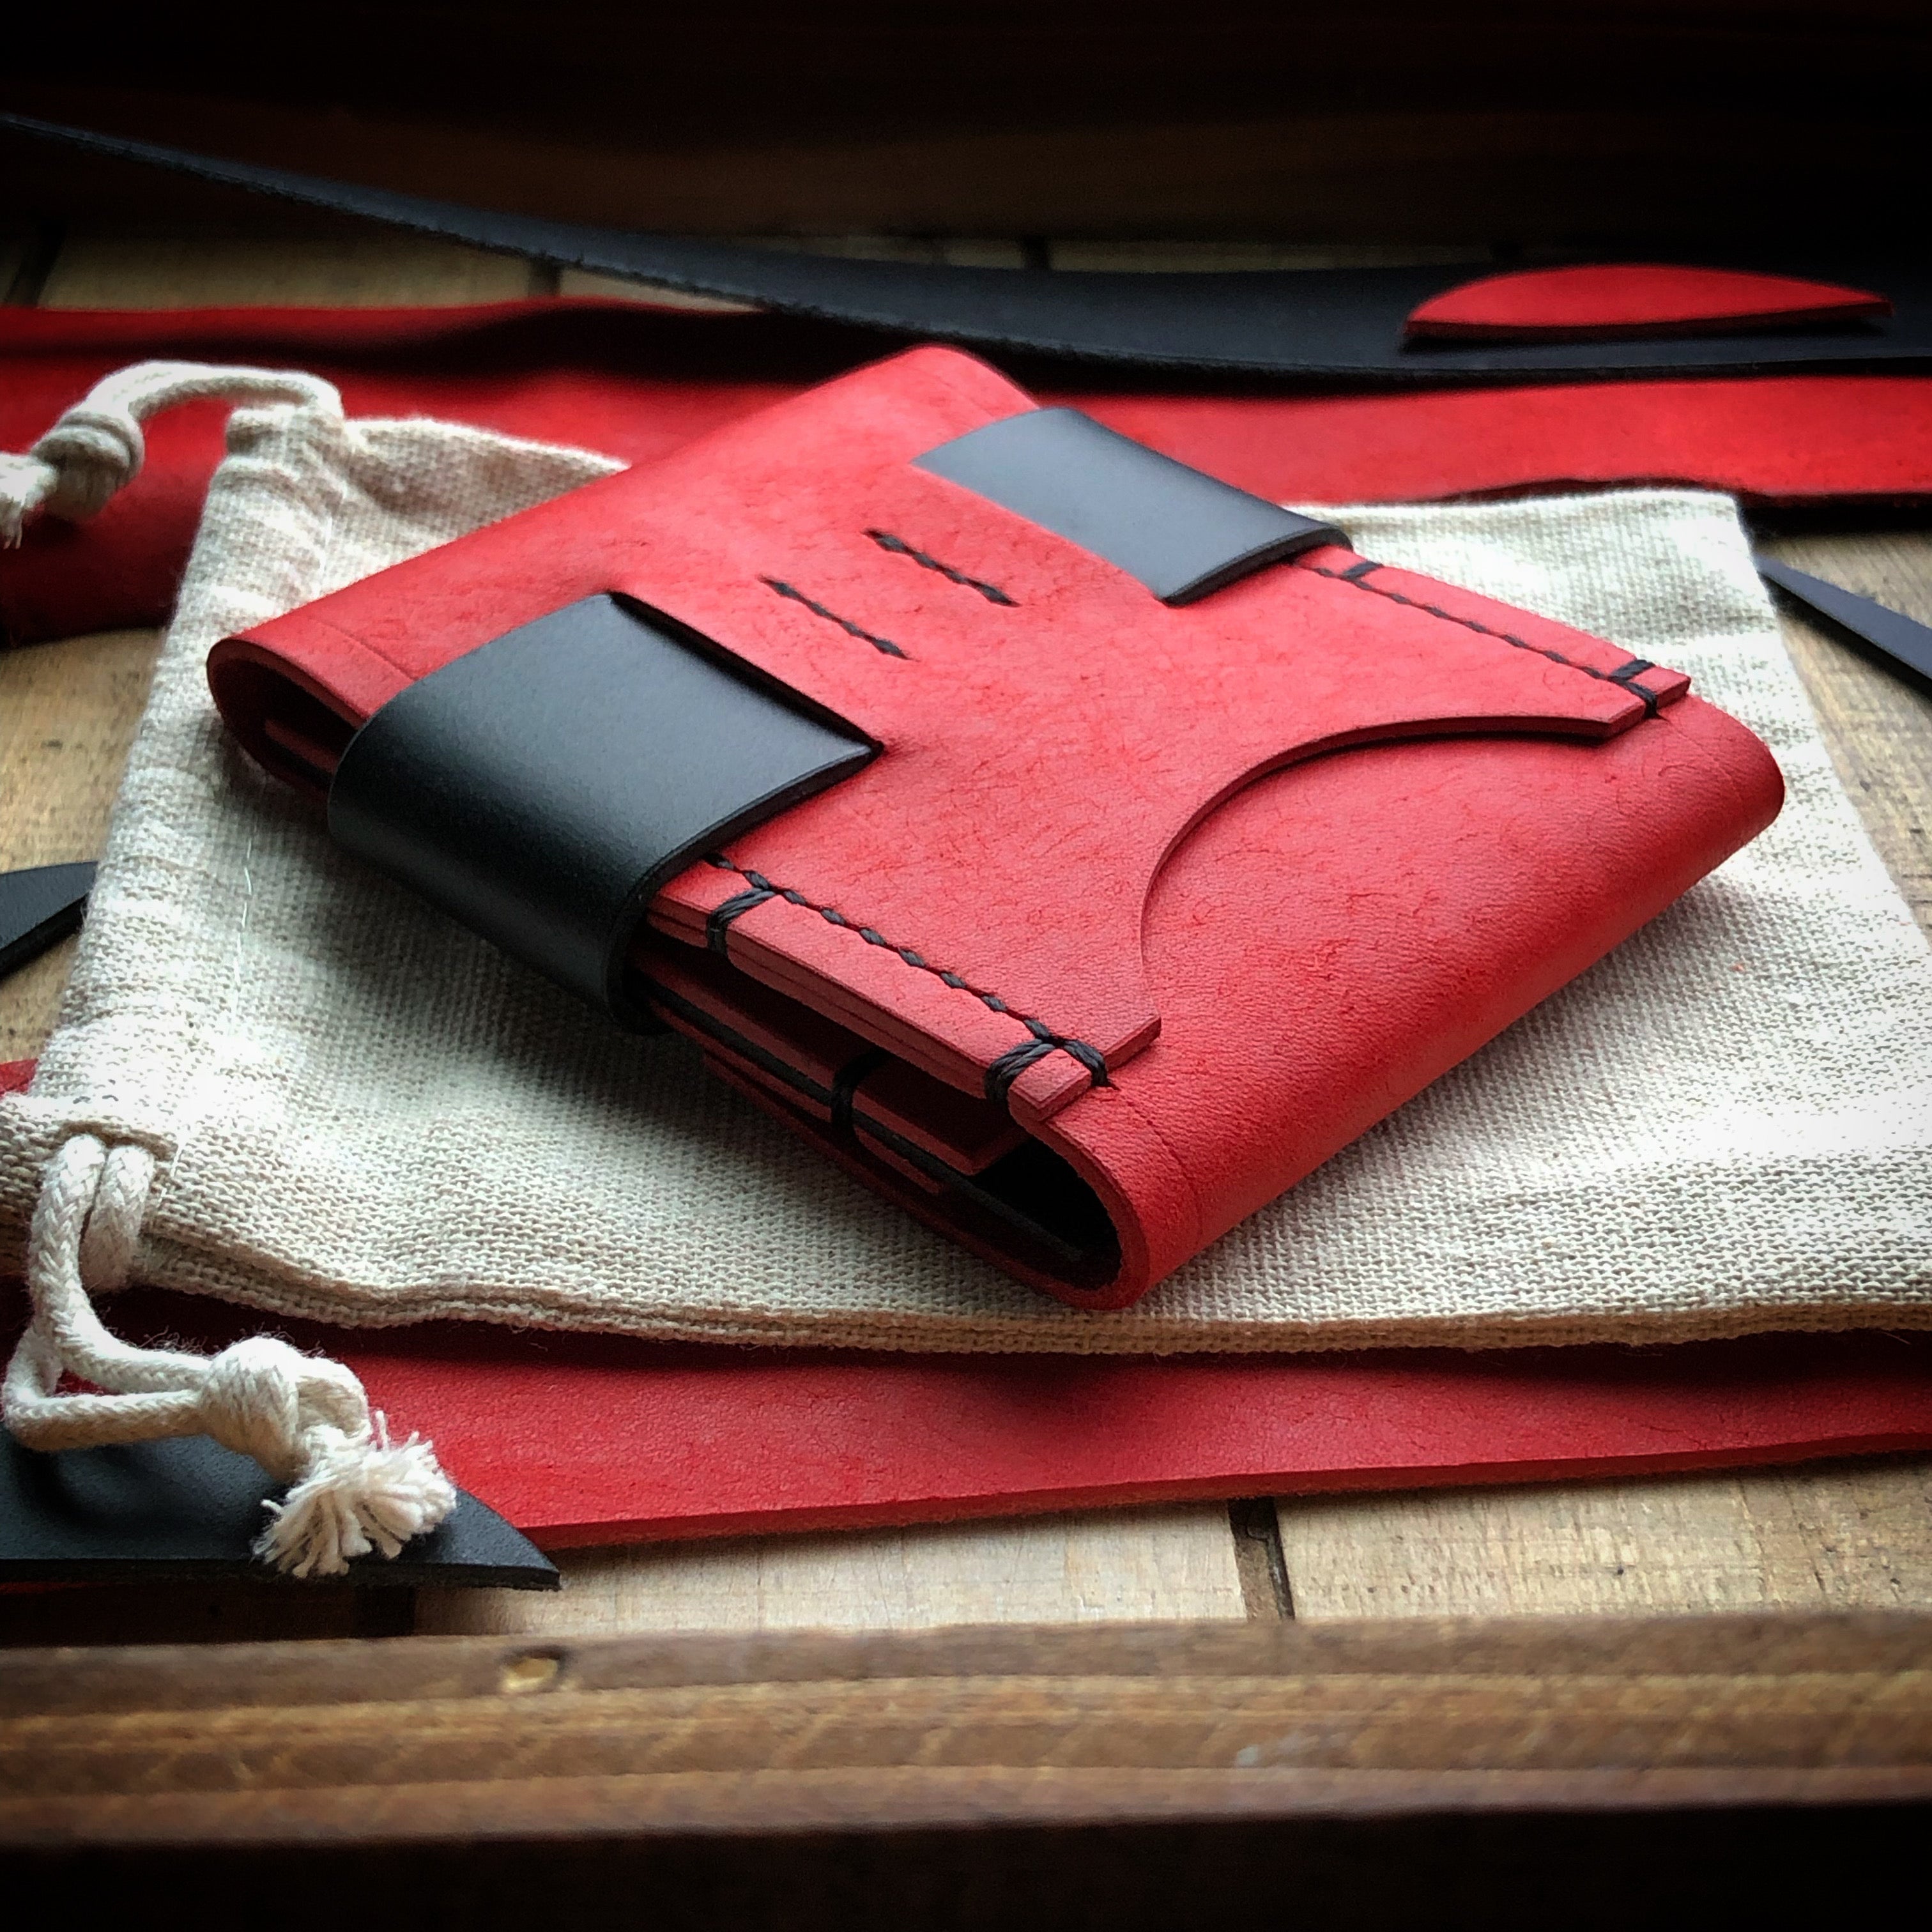 Luxe Minimalist Wallet - Quick Access - Red and Black